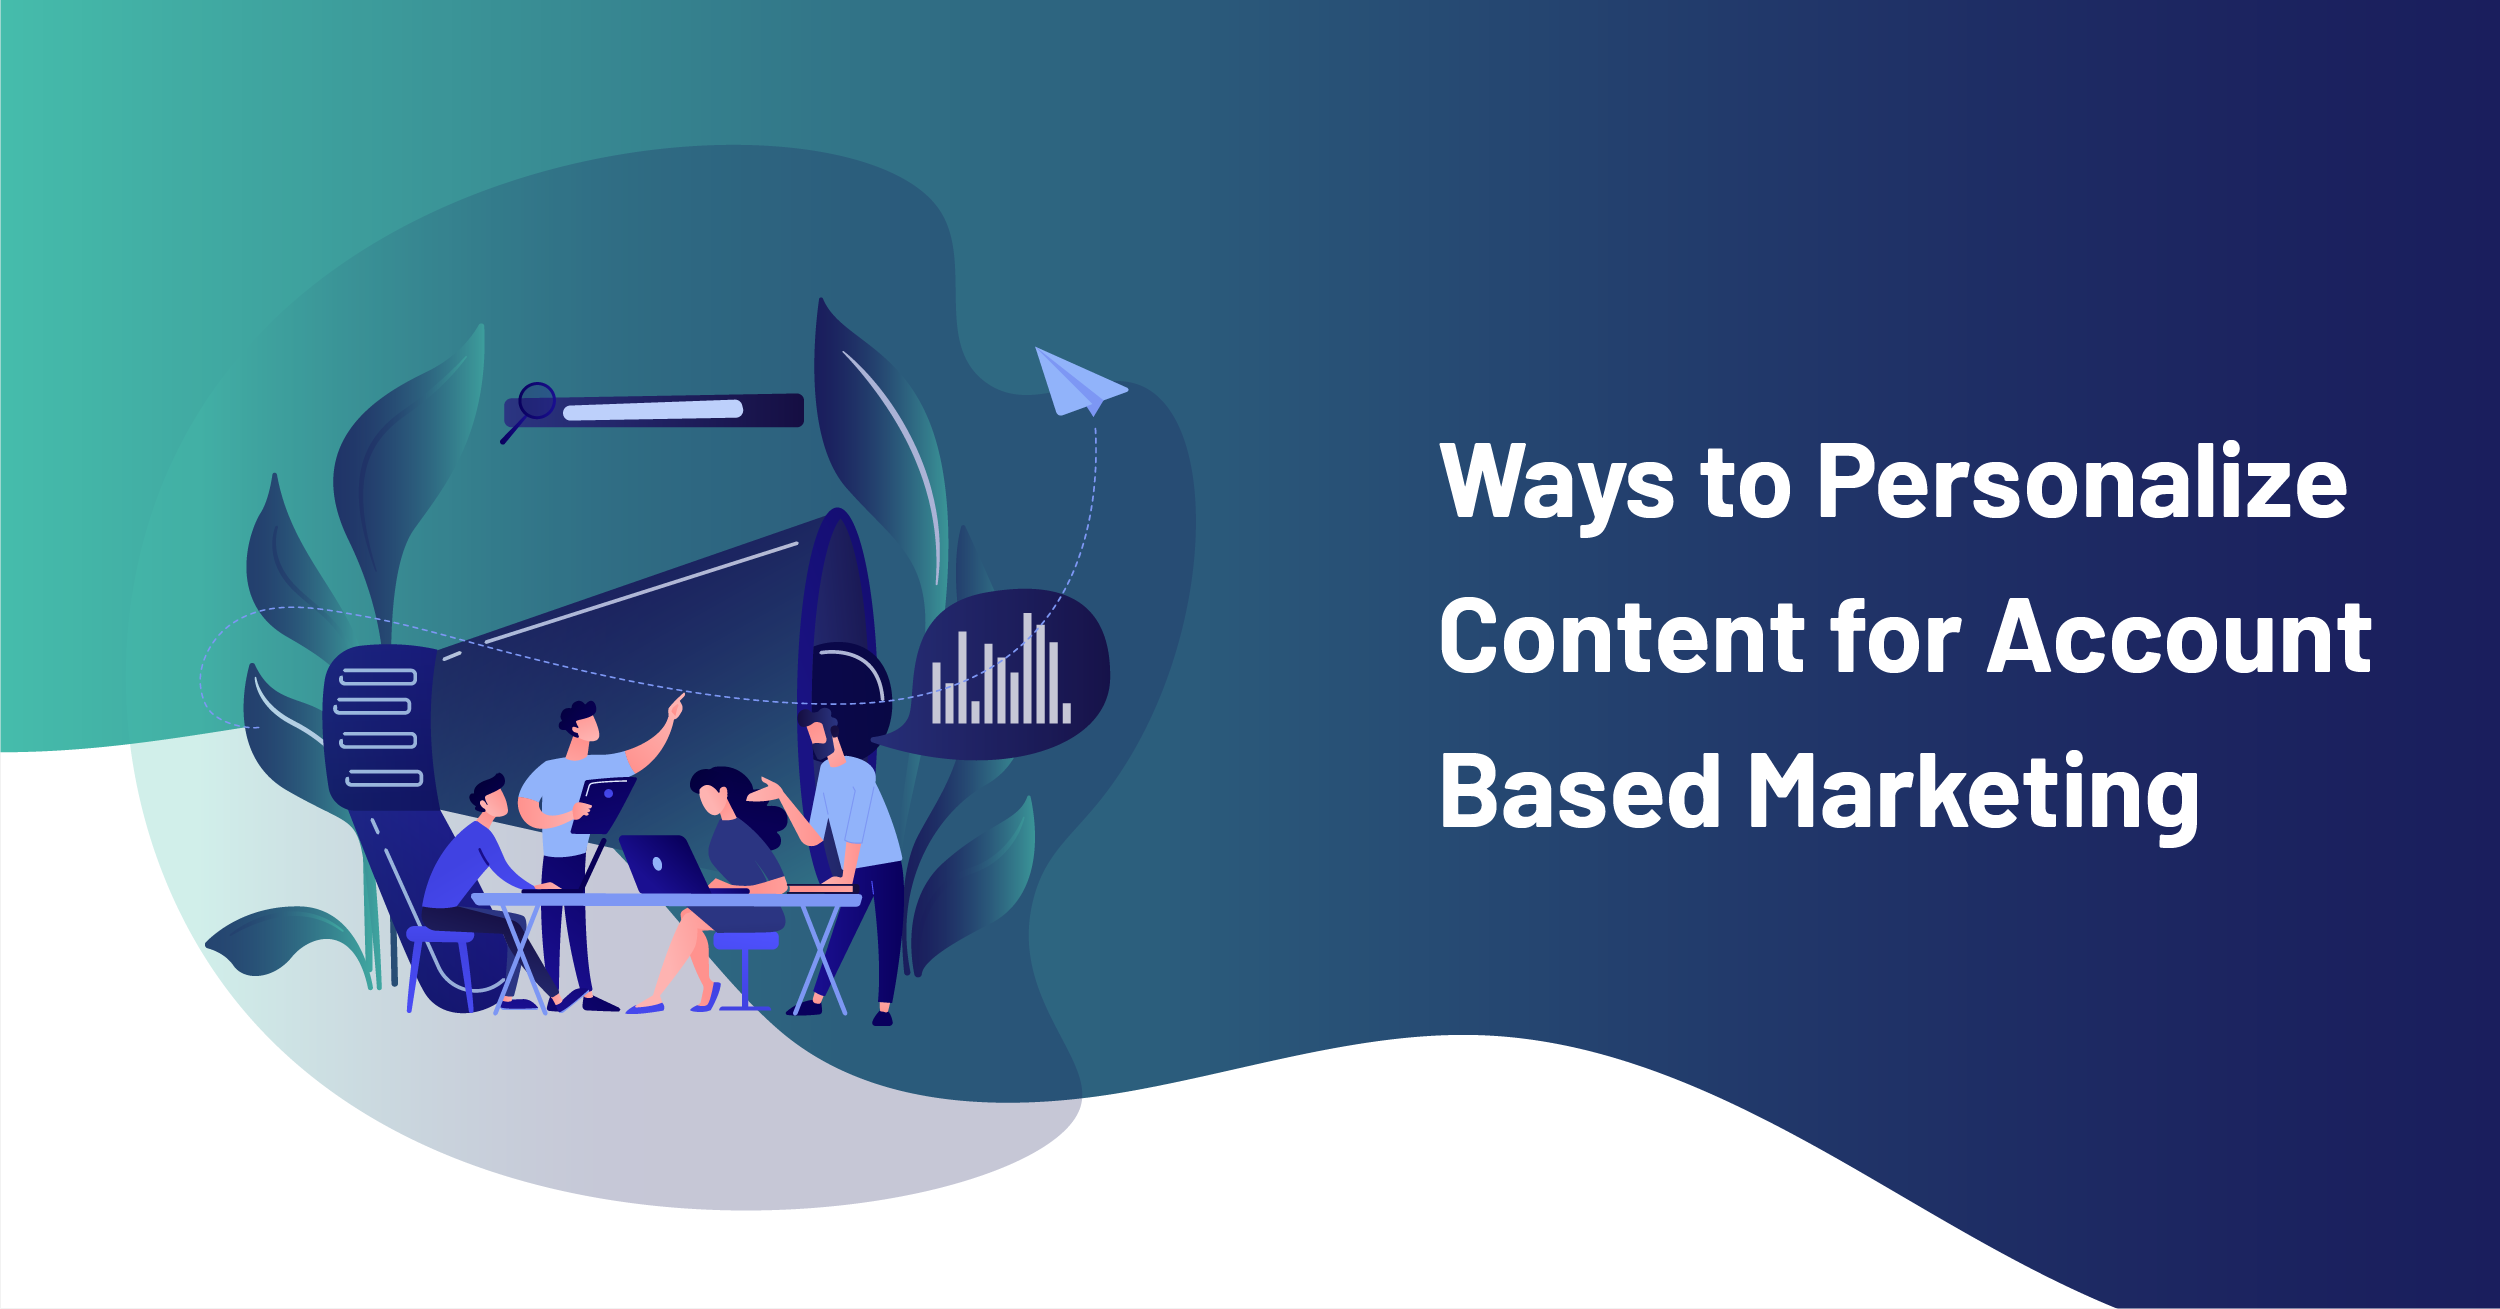 Ways to Personalize Content for Account Based Marketing